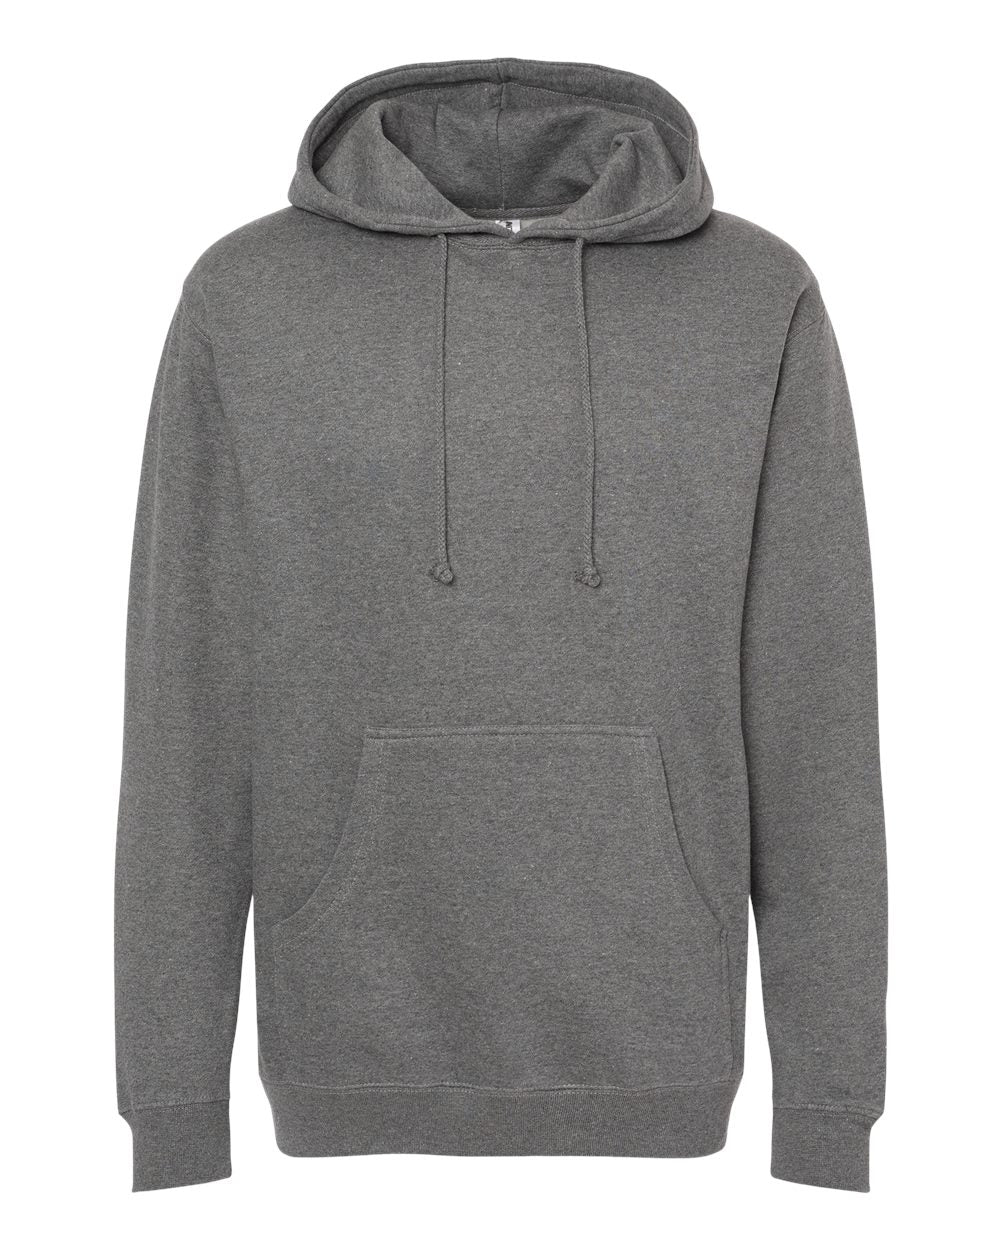 Independent Trading Co. Heavyweight Hooded Sweatshirt IND4000 #color_Gunmetal Heather